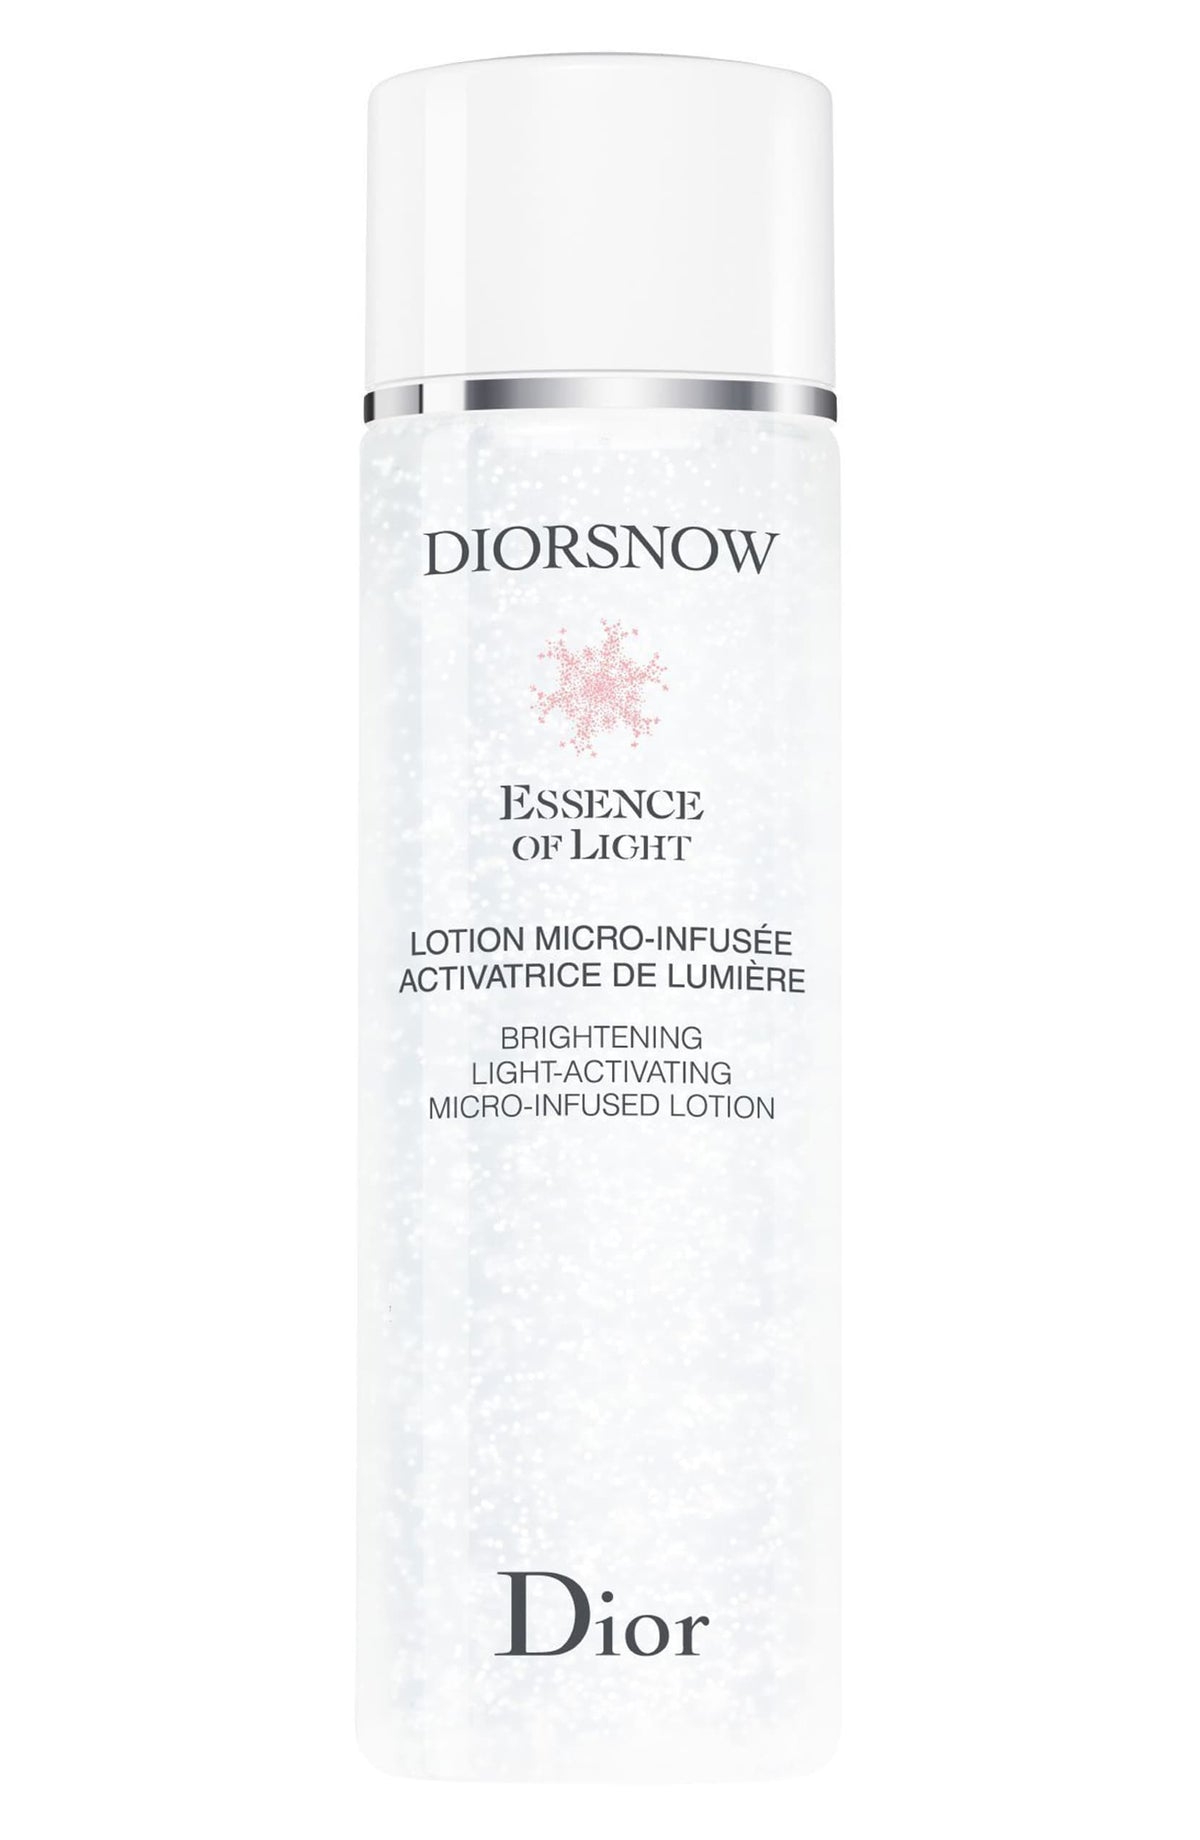 Dior Diorsnow Essence of Light Micro-Infused Lotion